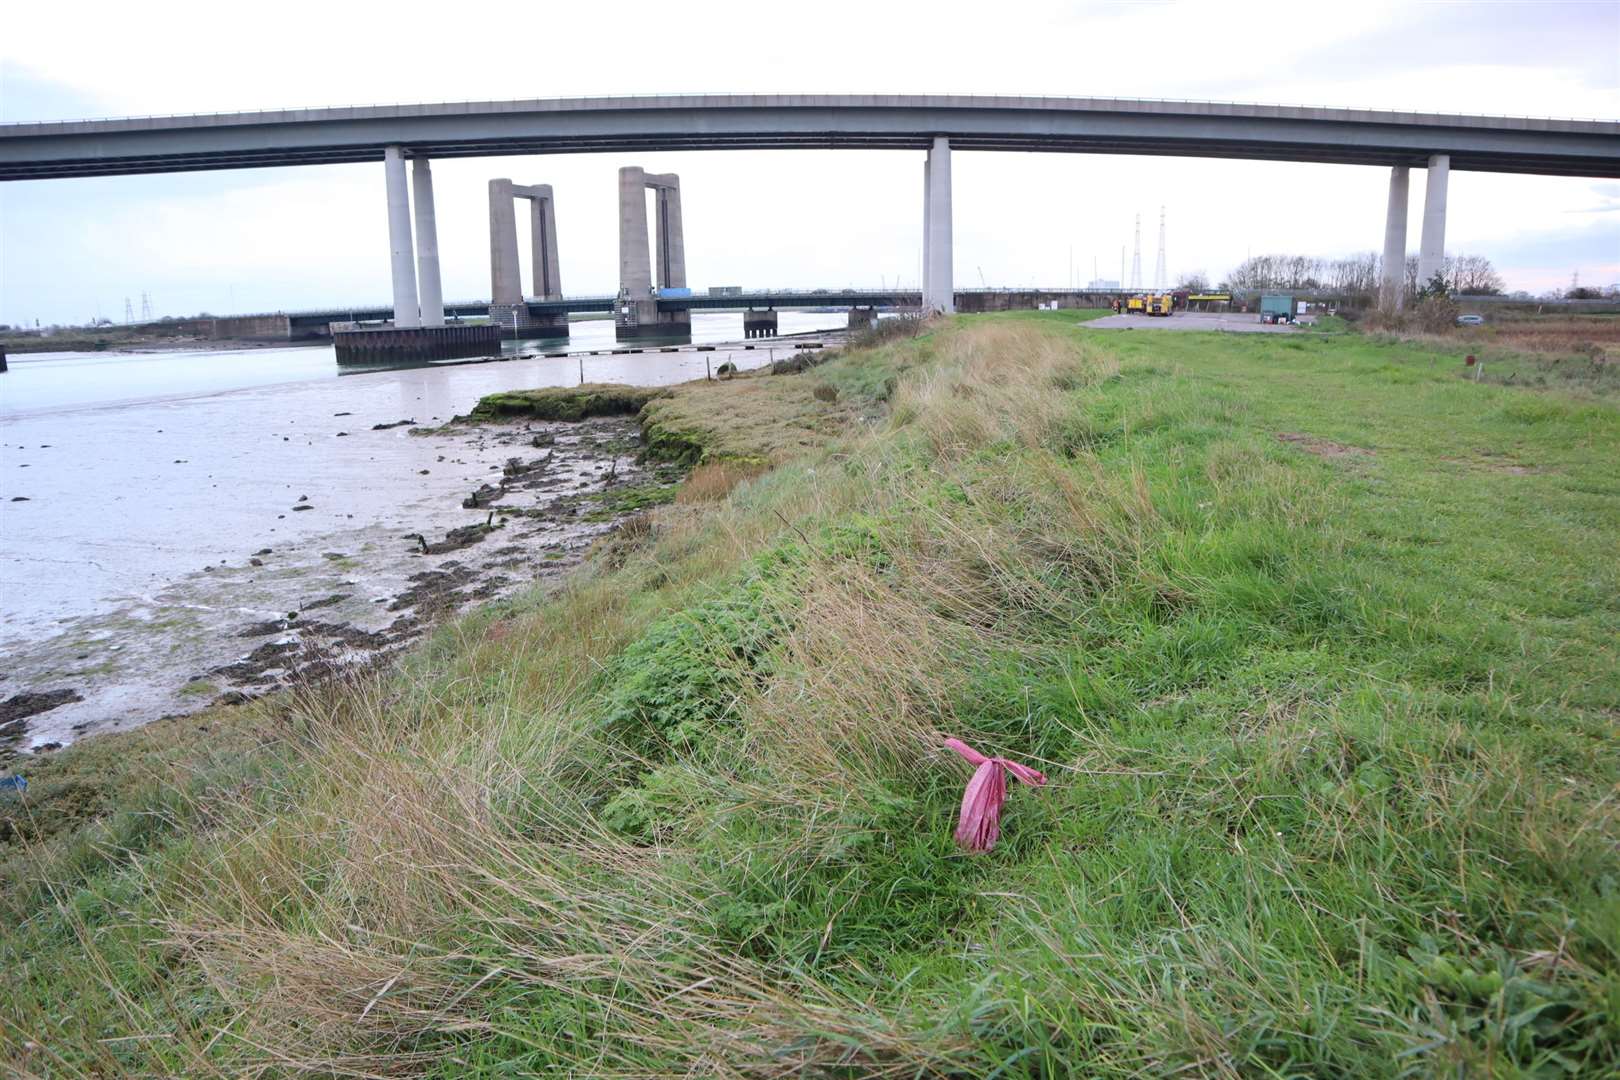 There were claims that rabbit intestines were scattered along the Saxon Shore Way footpath along the bank of The Swale near the Kingsferry Bridge at Iwade